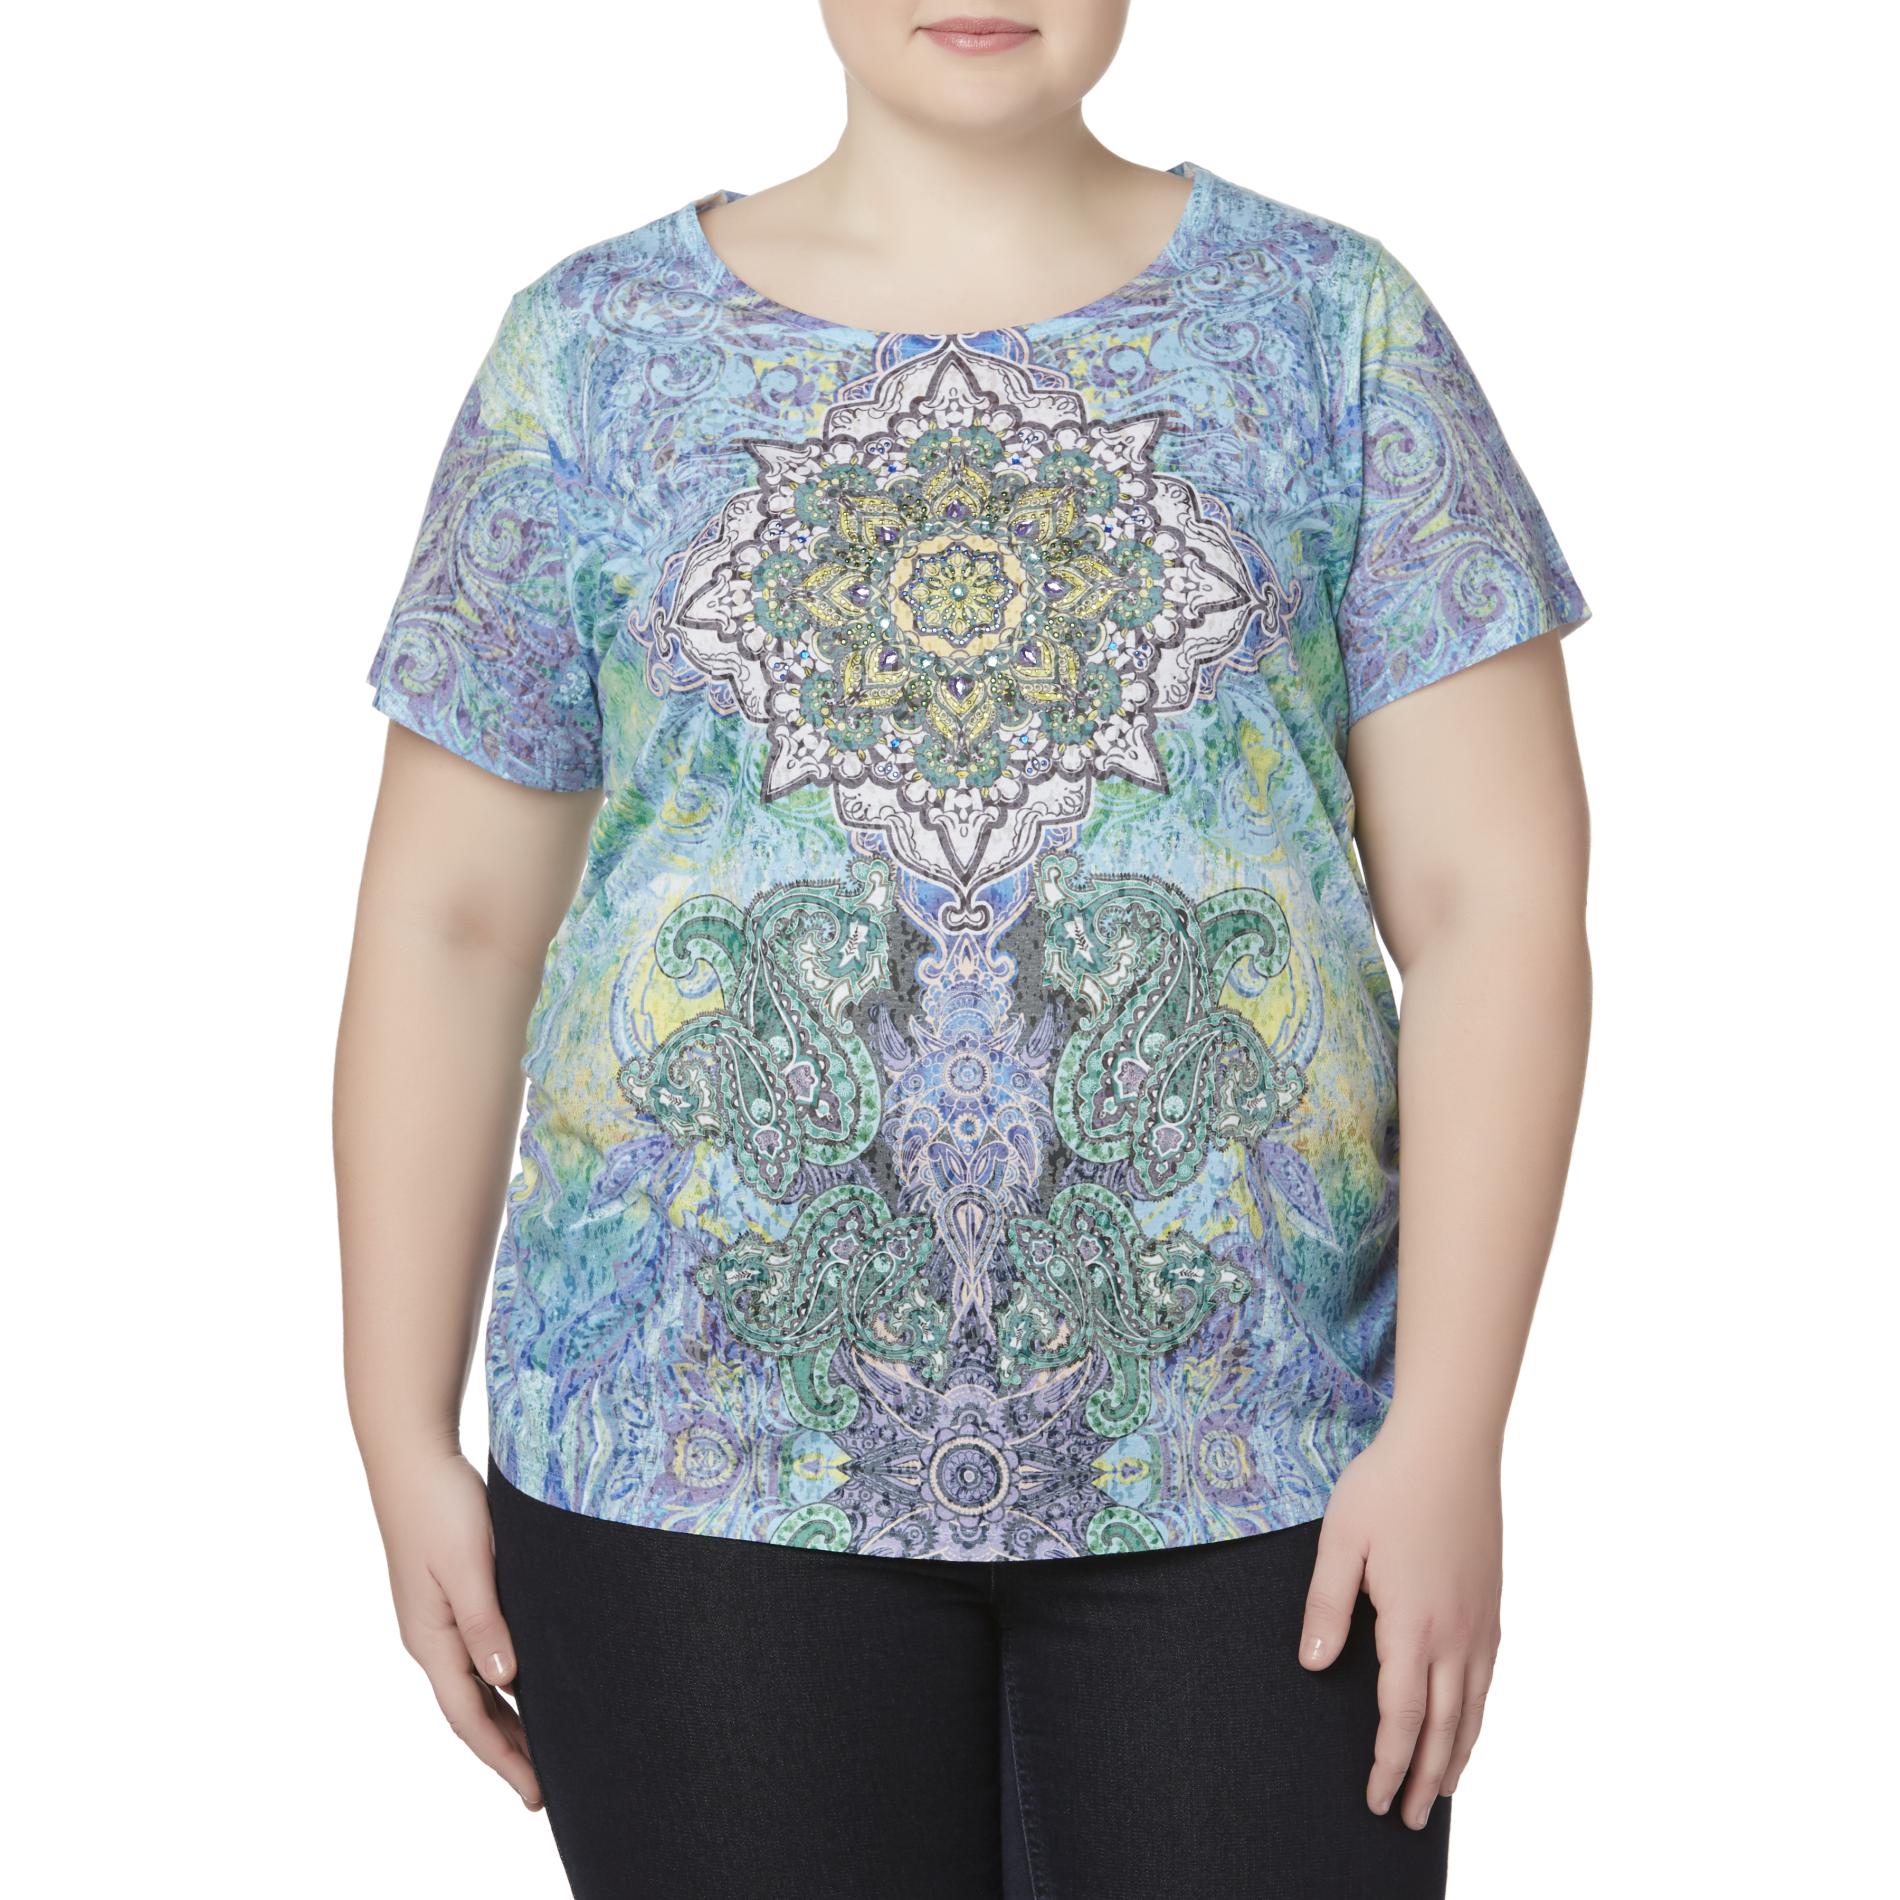 Simply Emma Women's Plus Embellished Top - Paisley